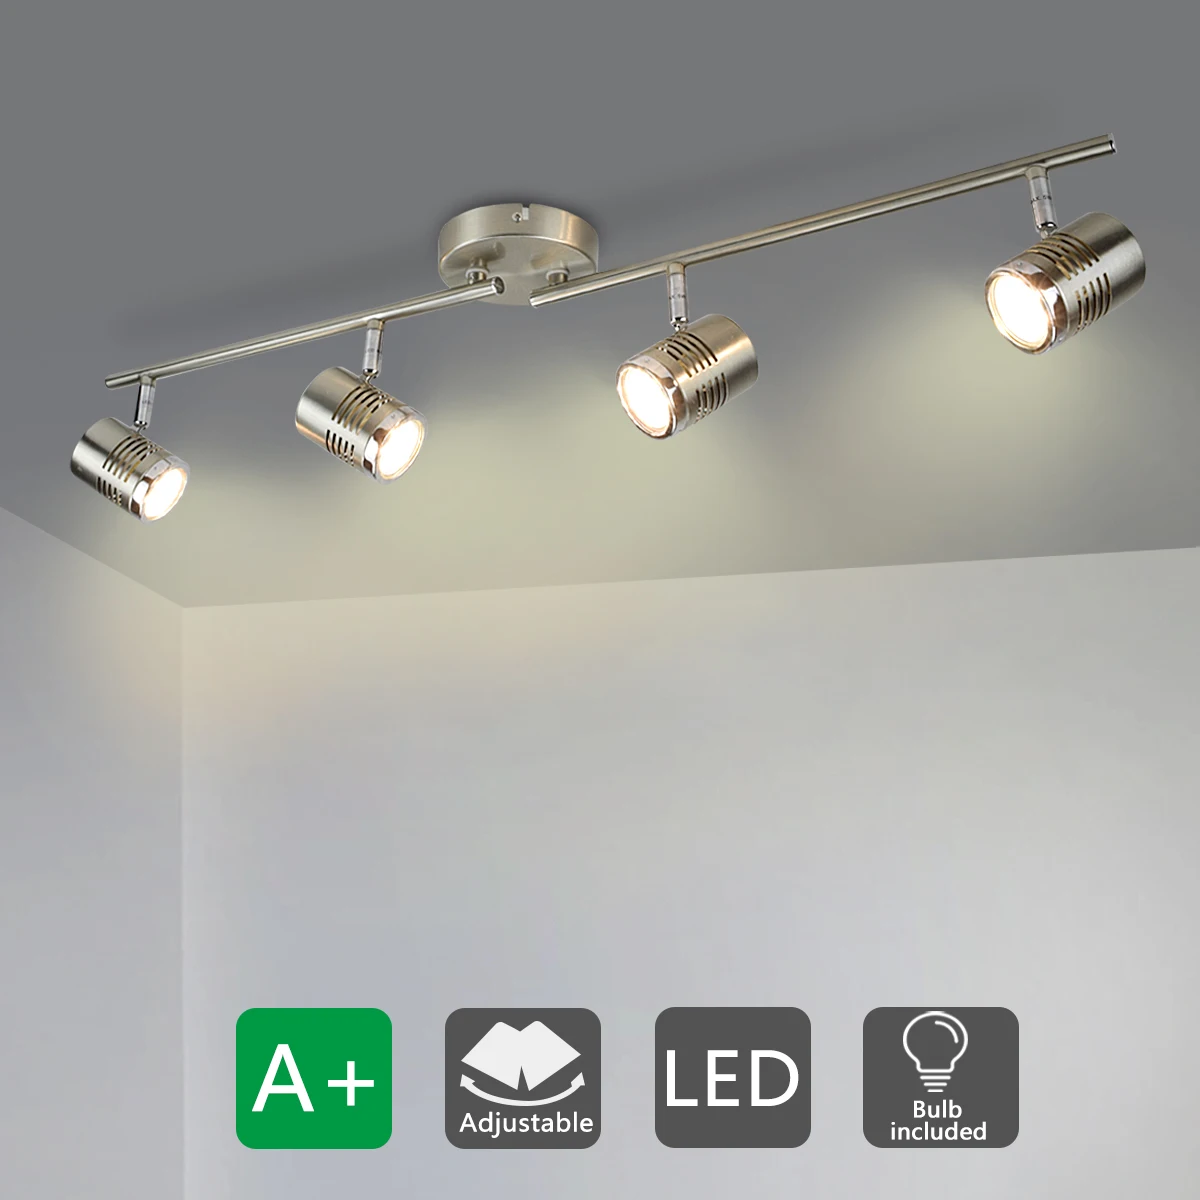 

Depuley LED Ceiling Track Light Kits Flush Mounted Ceiling SpotLight GU10 Bulbs(Included) for Kitchen, Dining Room